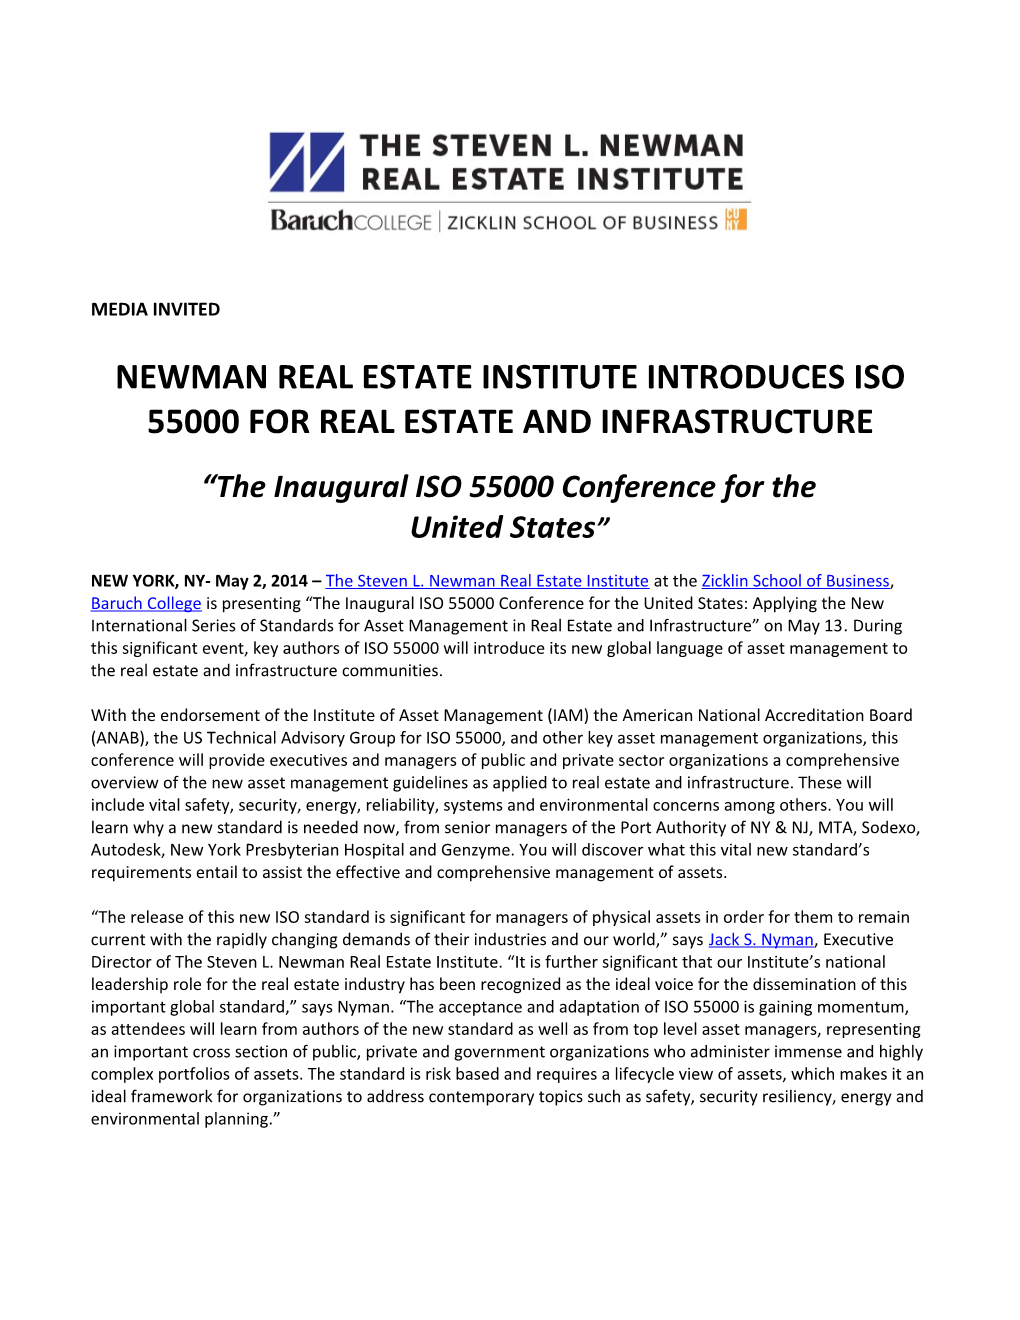 Newman Real Estate Institute Introduces Iso 55000 for Real Estate and Infrastructure